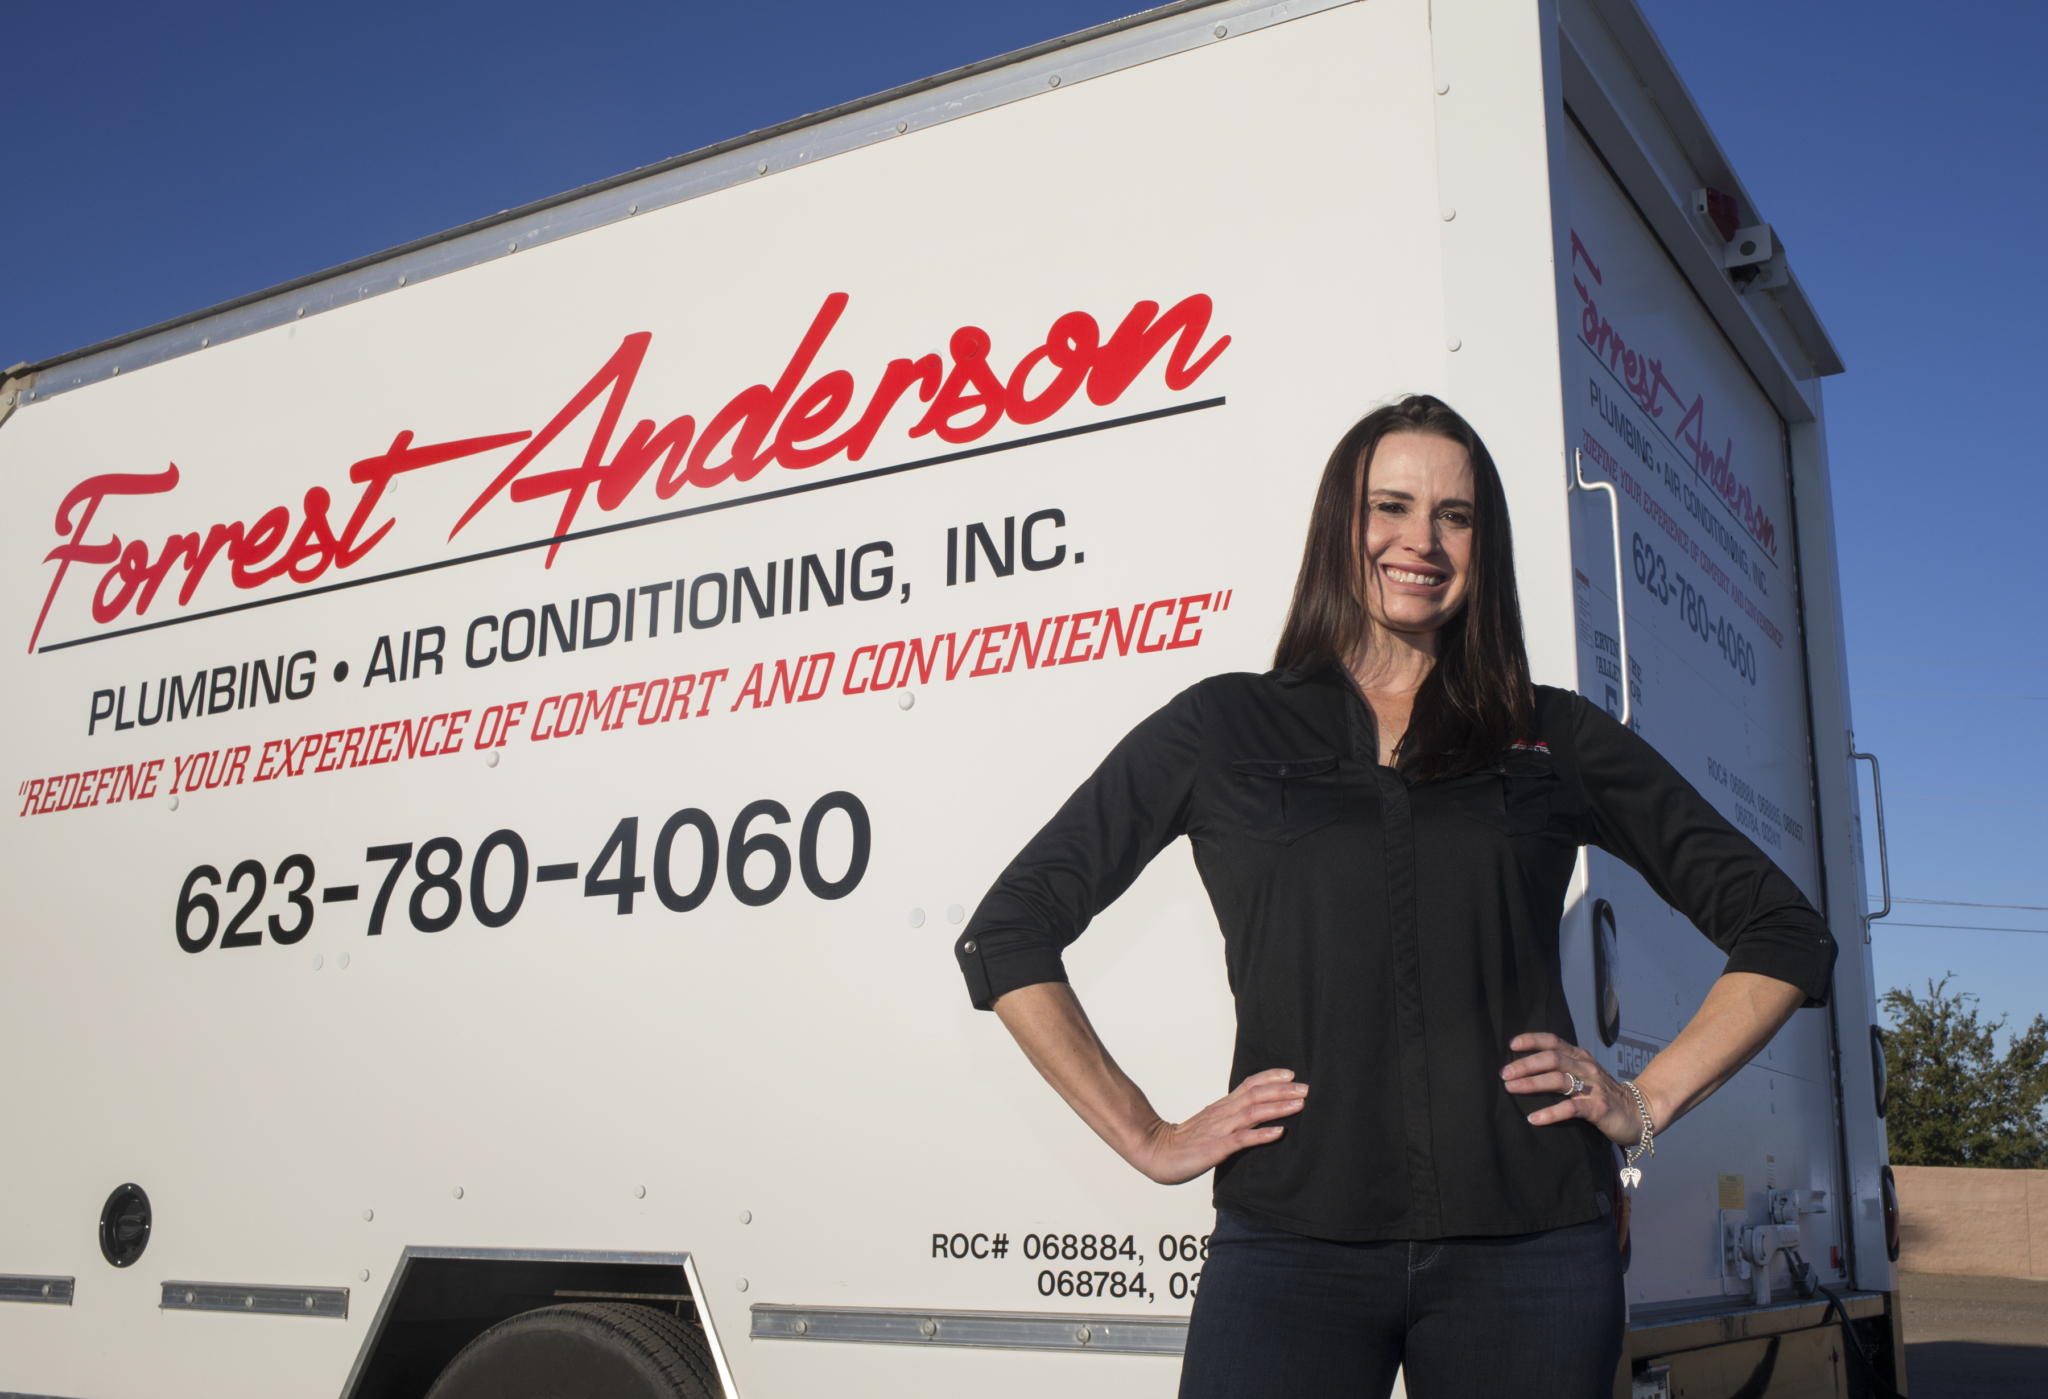 Audrey Monell, owner of Forrest Anderson Plumbing and Air Conditioning